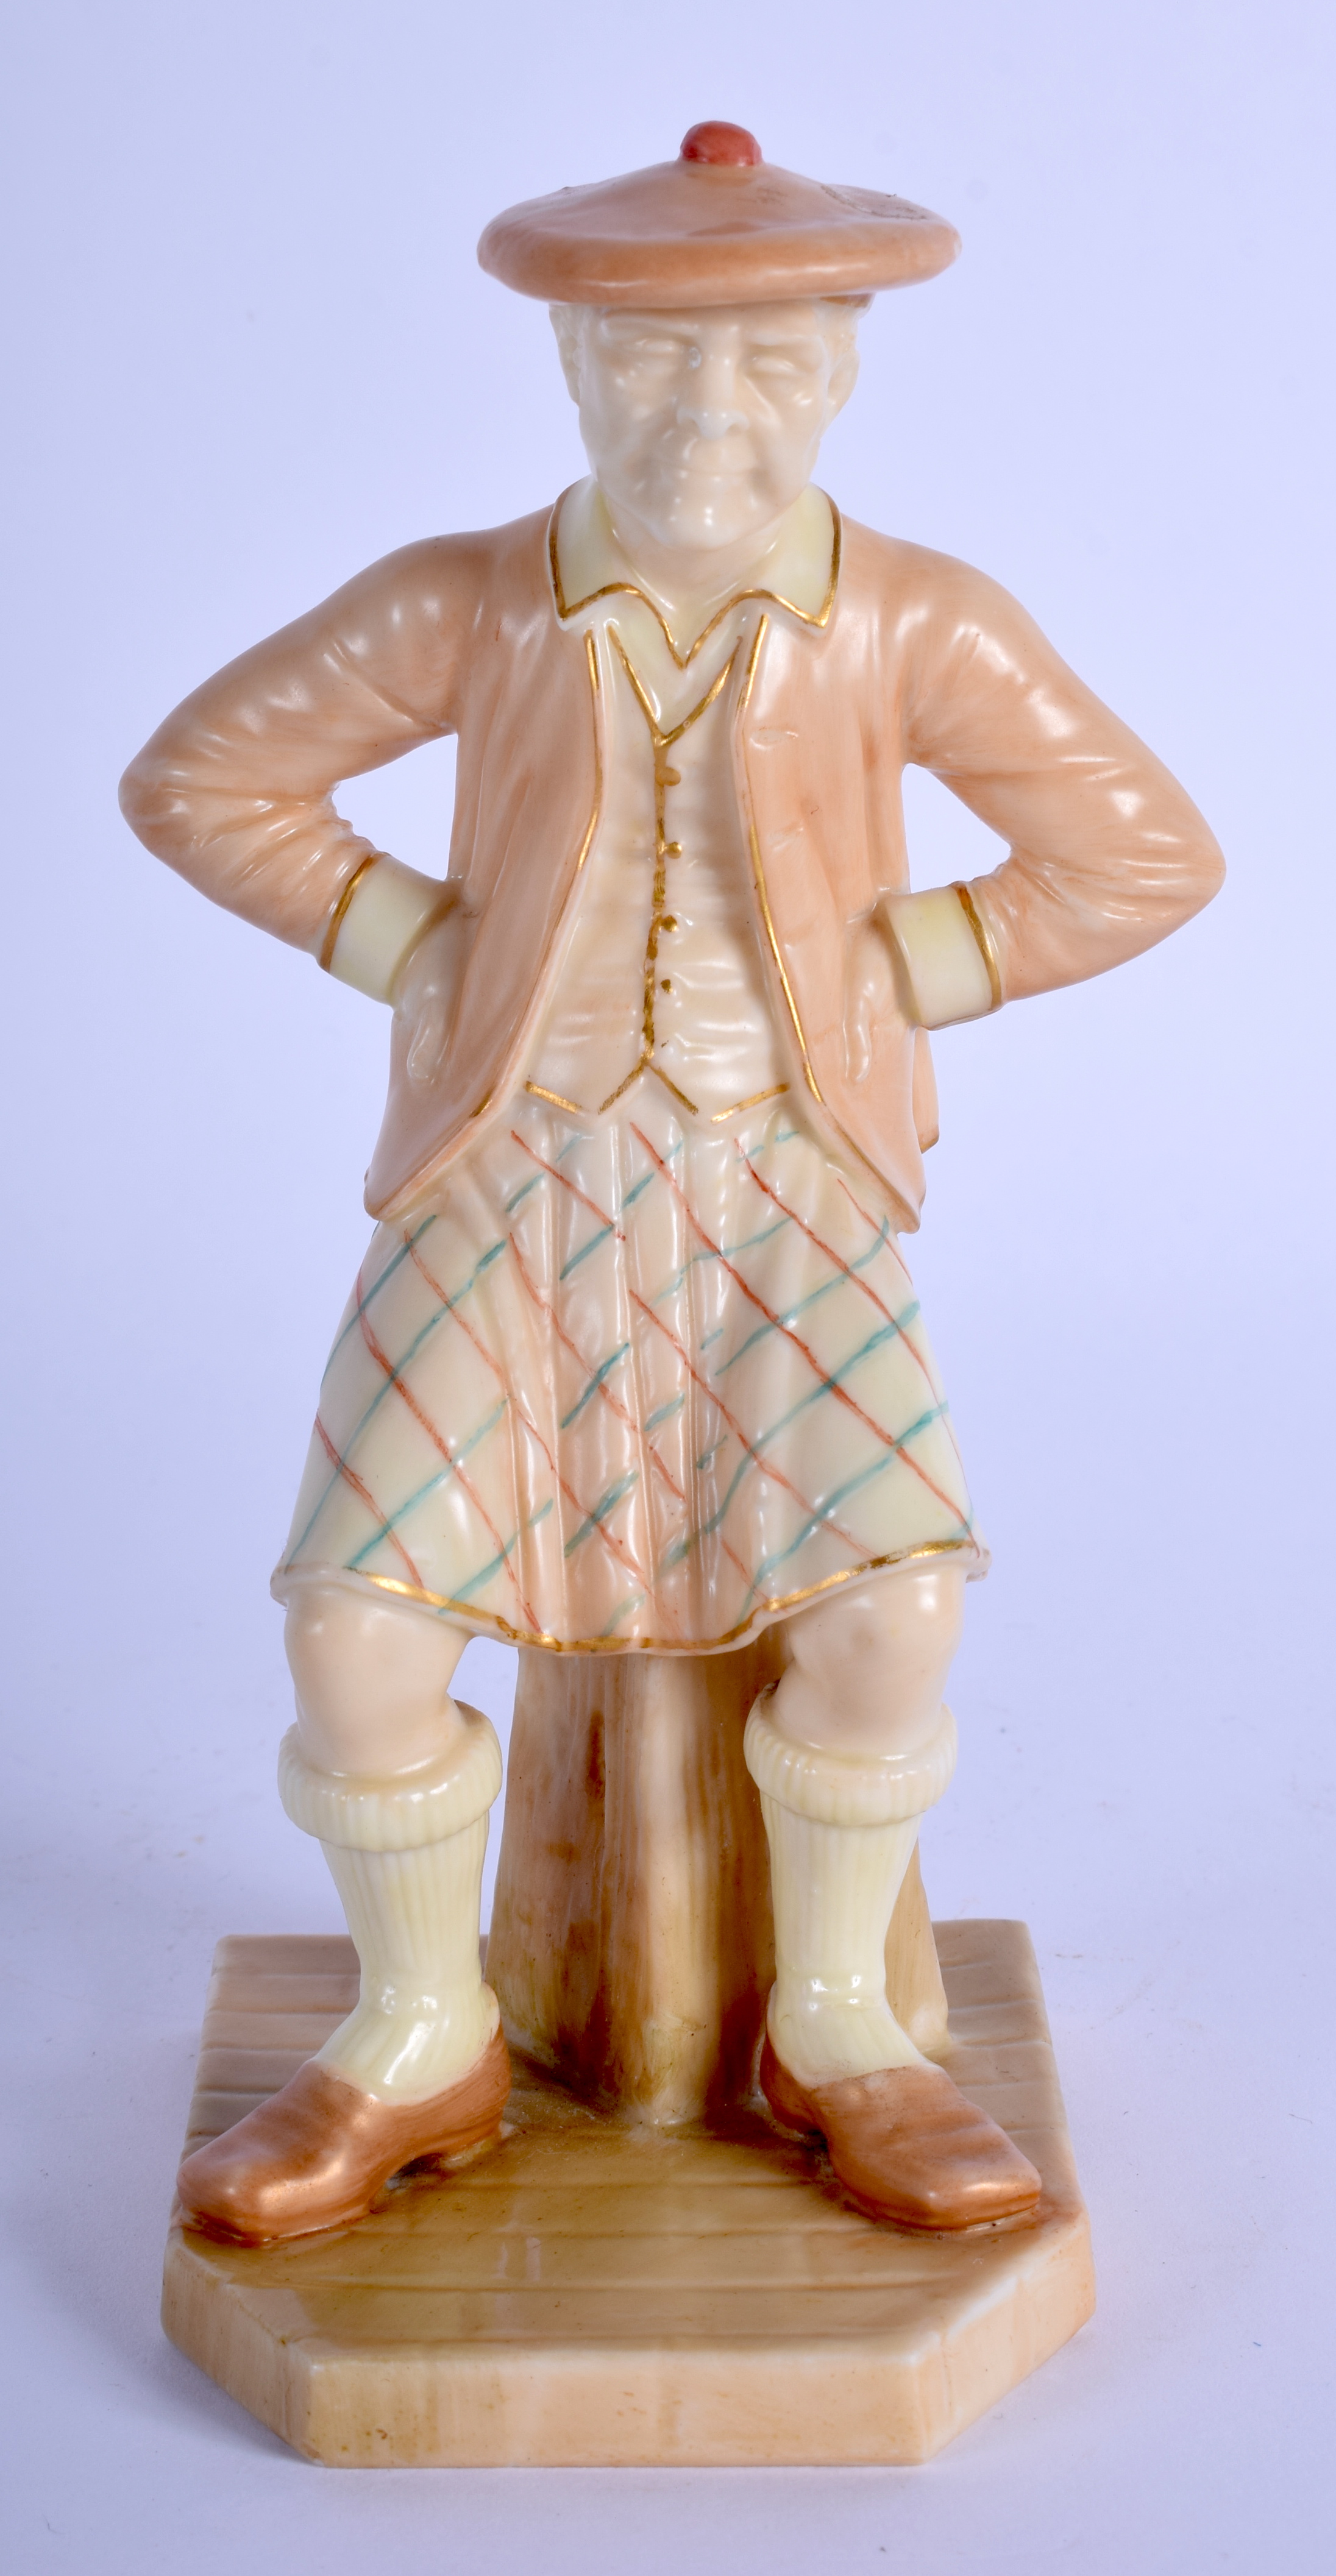 Royal Worcester figure of a man with a beret, the Scotsman from the Countries of the World series c.